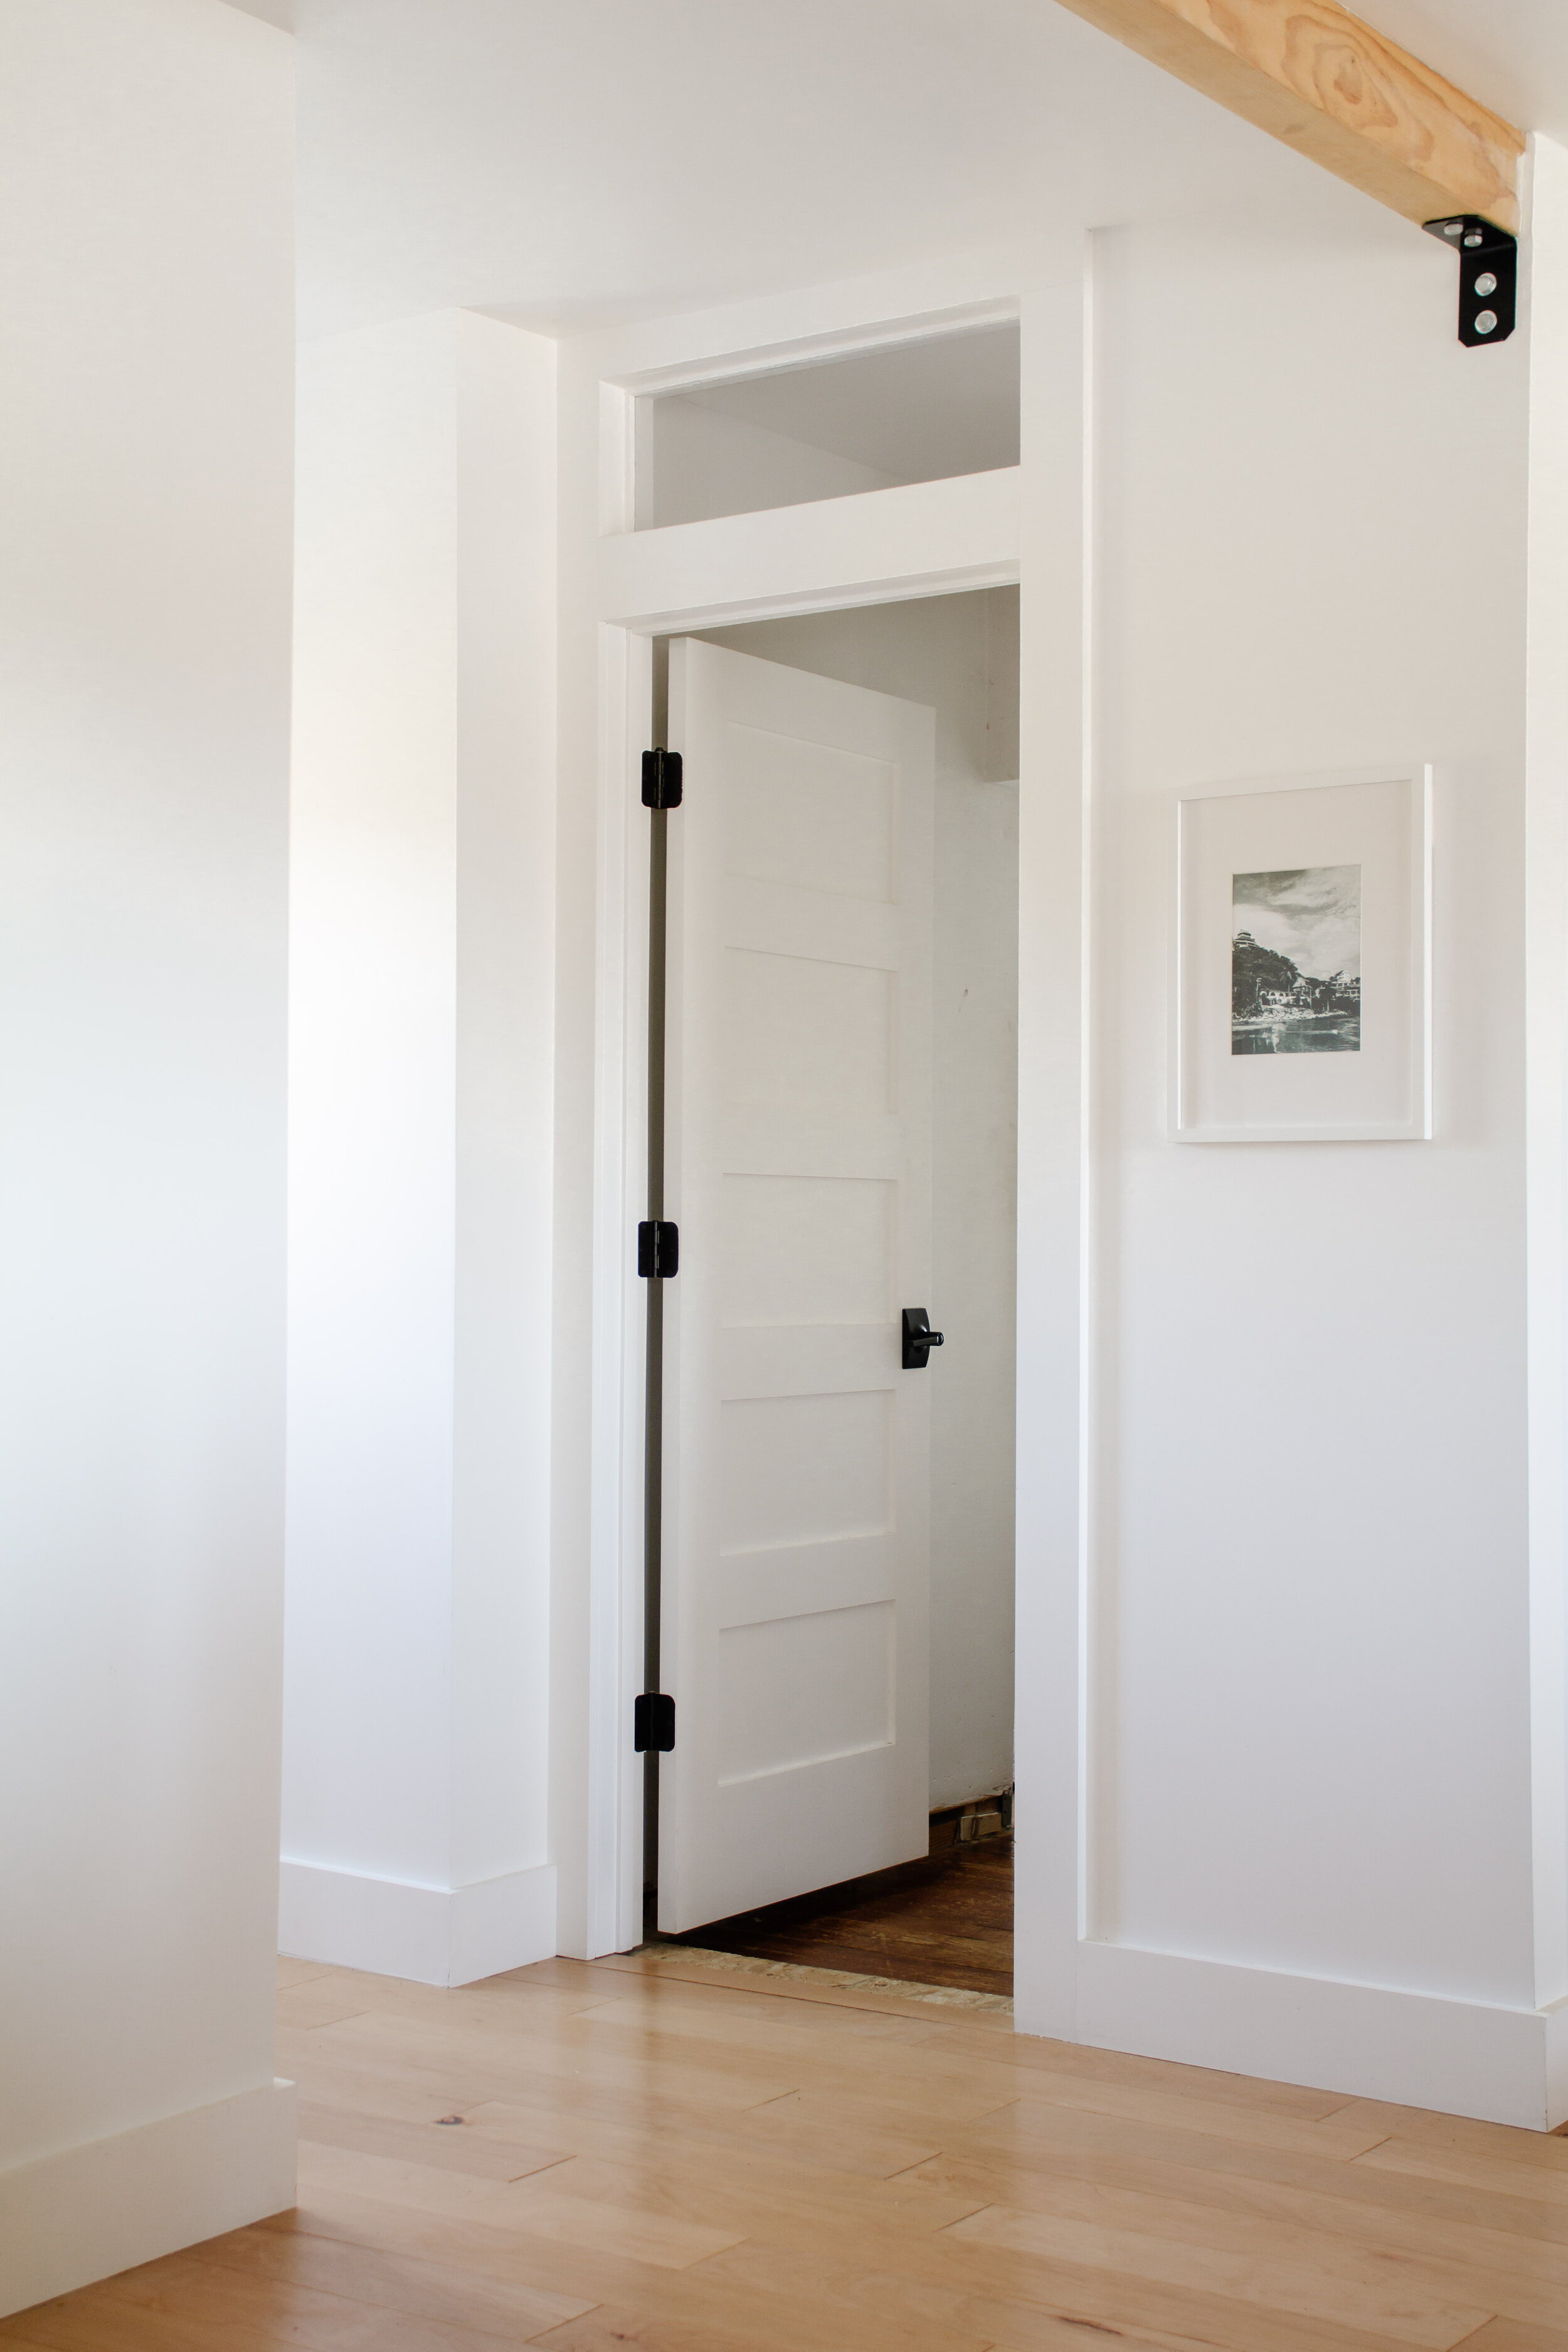 Where to find budget friendly interior doors. How to make standard and budget friendly doors look high end and custom. Interior door round up and inspiration by Nadine Stay.